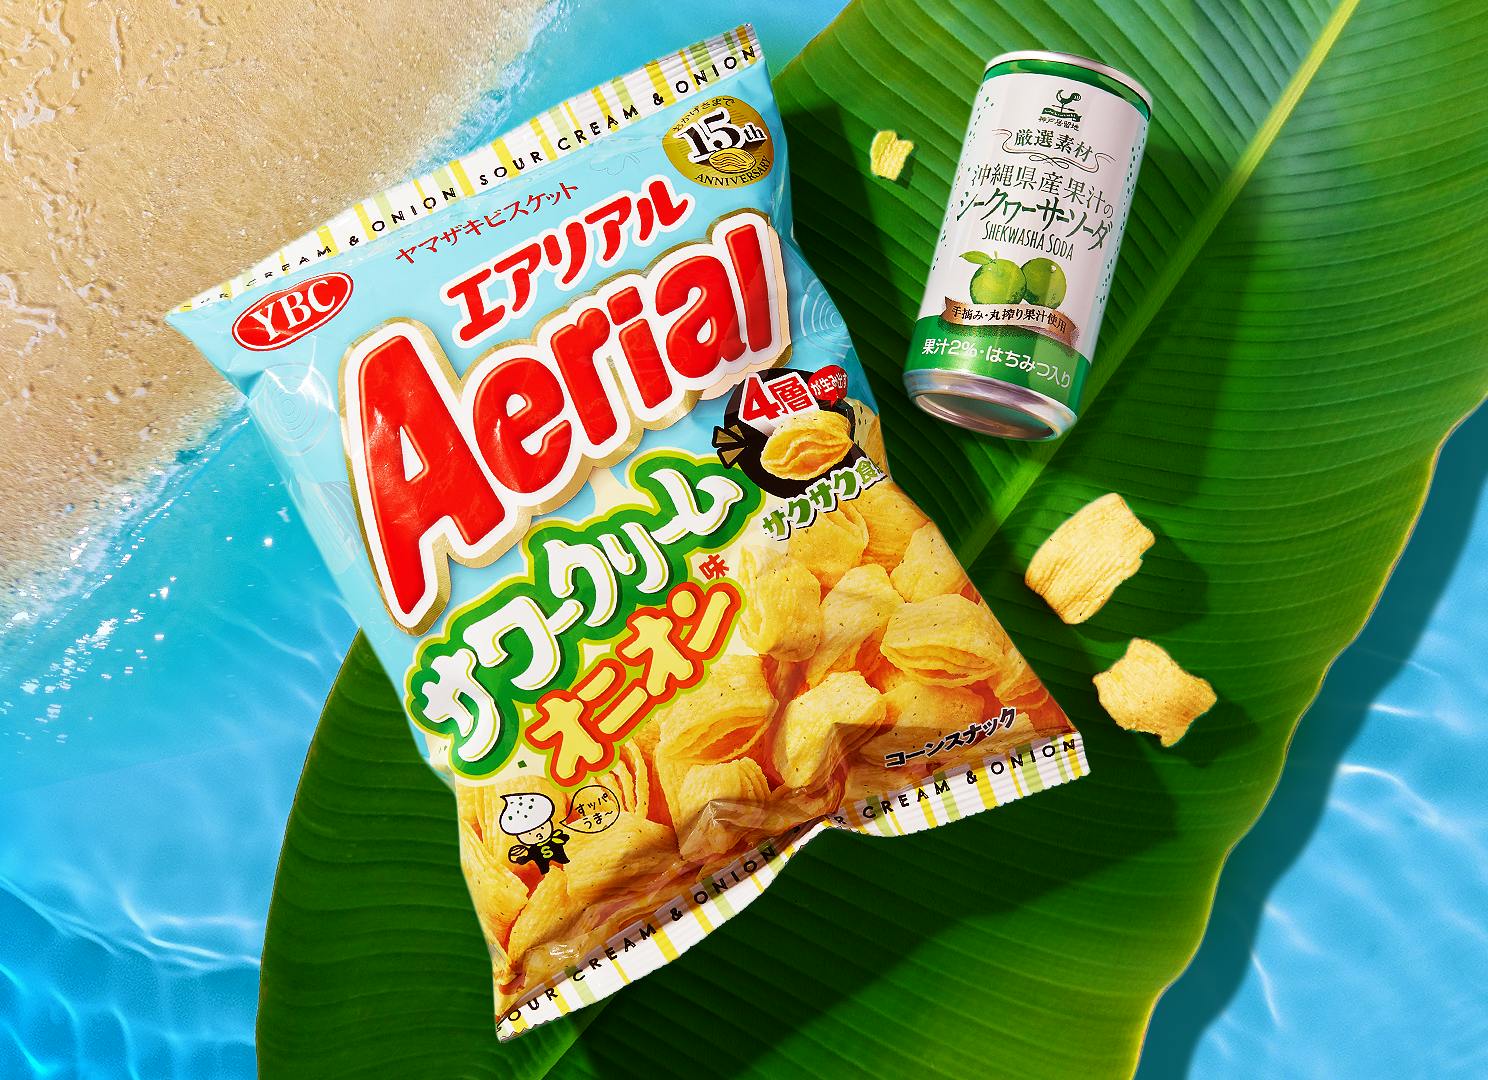 Aerial Sour Cream & Onion Chips and Shikuwasa Soda sit on a palm tree on an Okinawan beach.